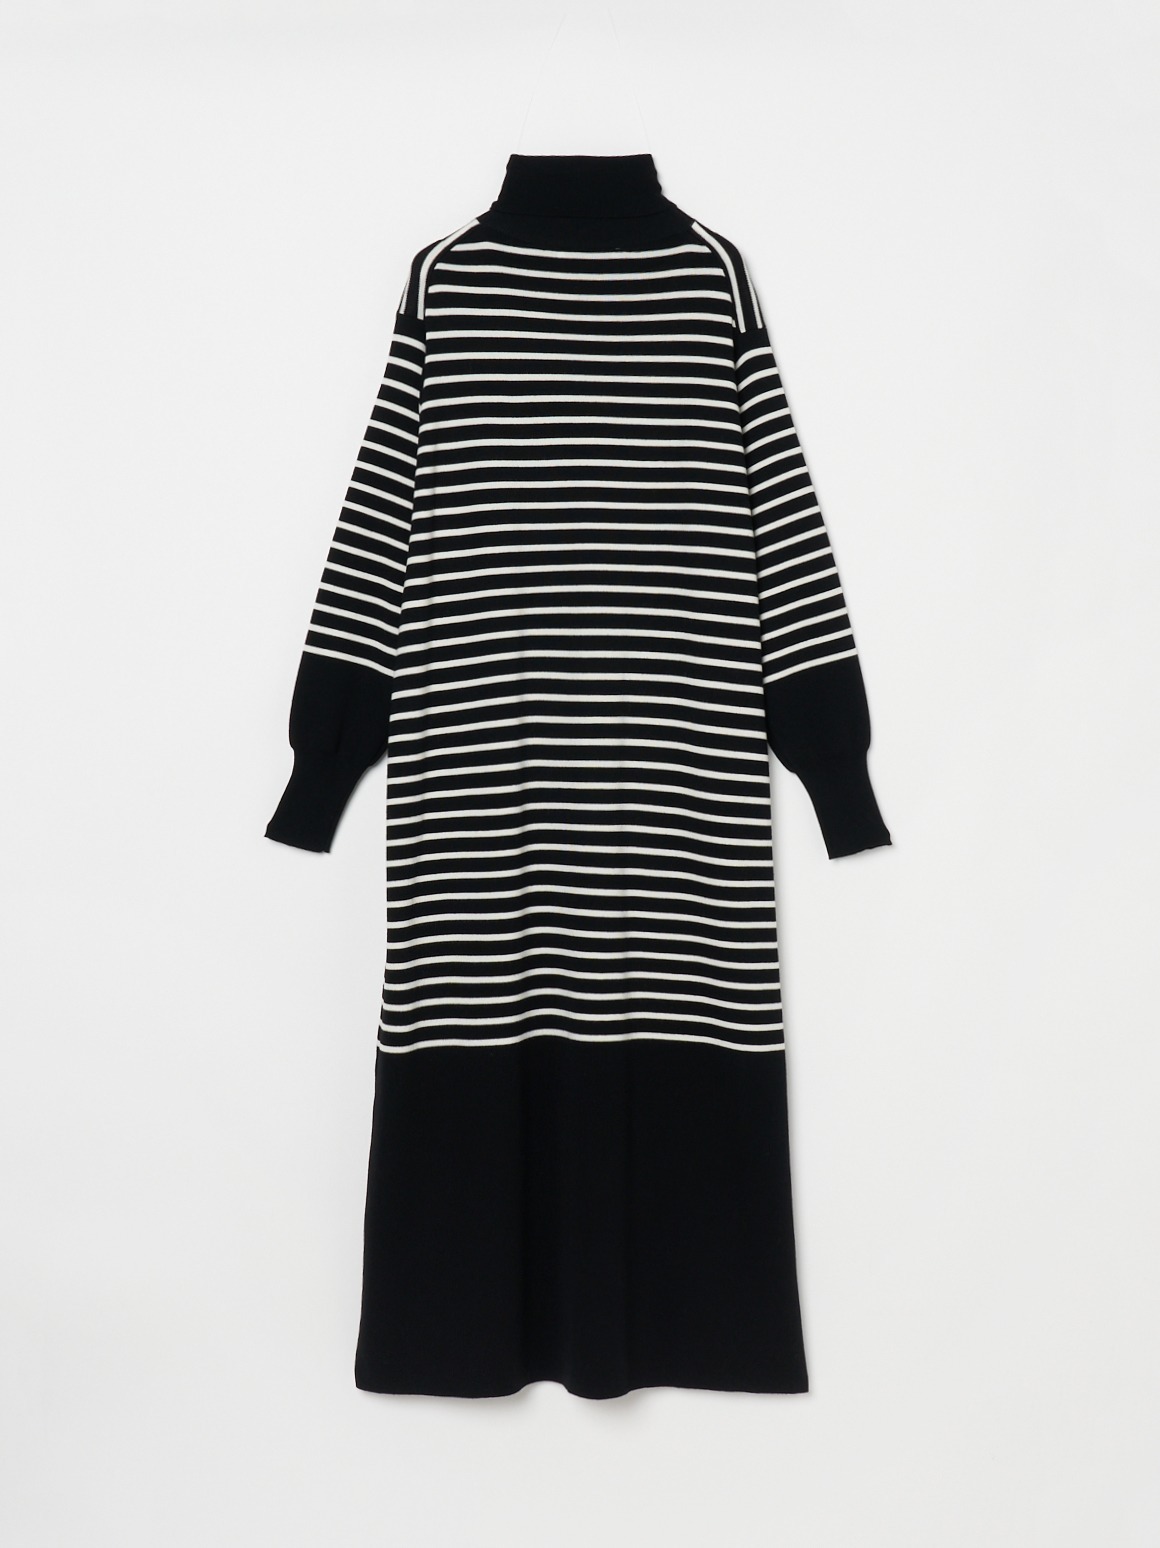 Wool outfit dress 詳細画像 off white 1